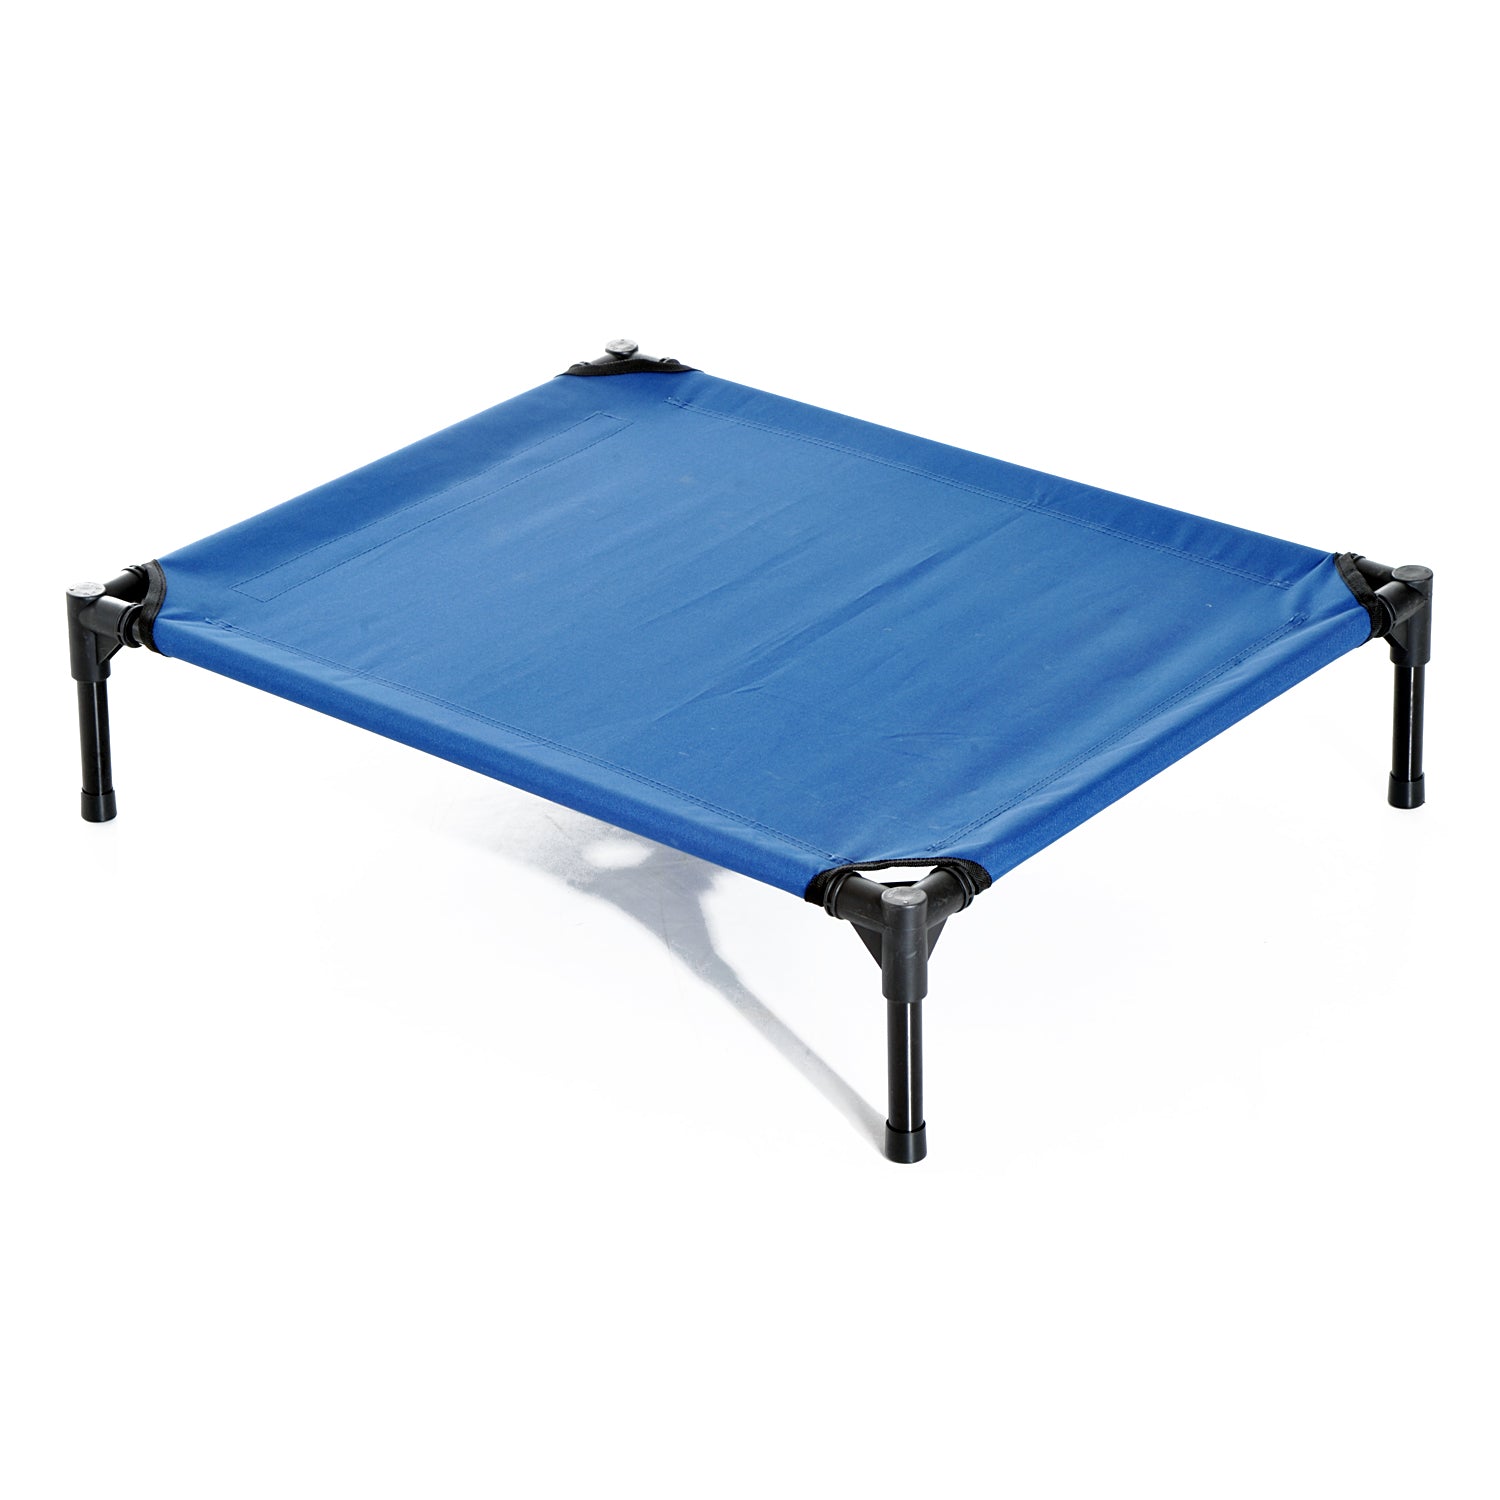 Medium Dogs Portable Elevated Fabric Bed for Camping Outdoors Blue